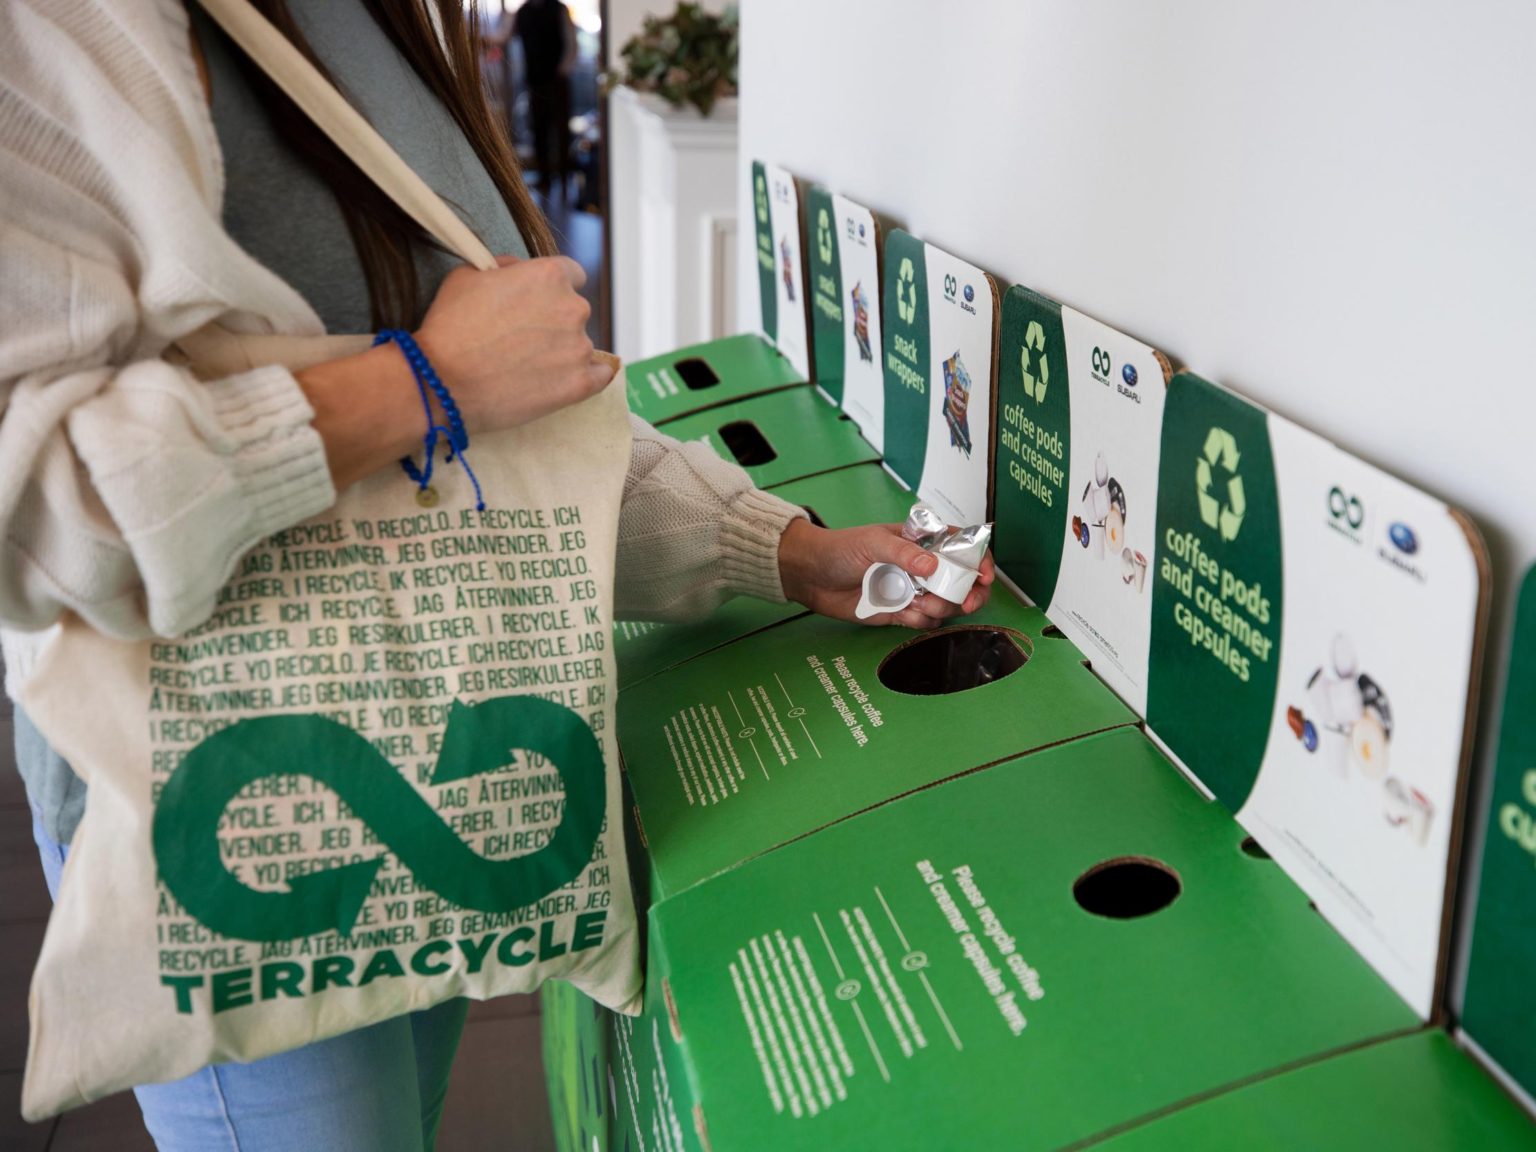 Subaru dealerships have recycling items for years through the Subaru Loves the Earth campaign.